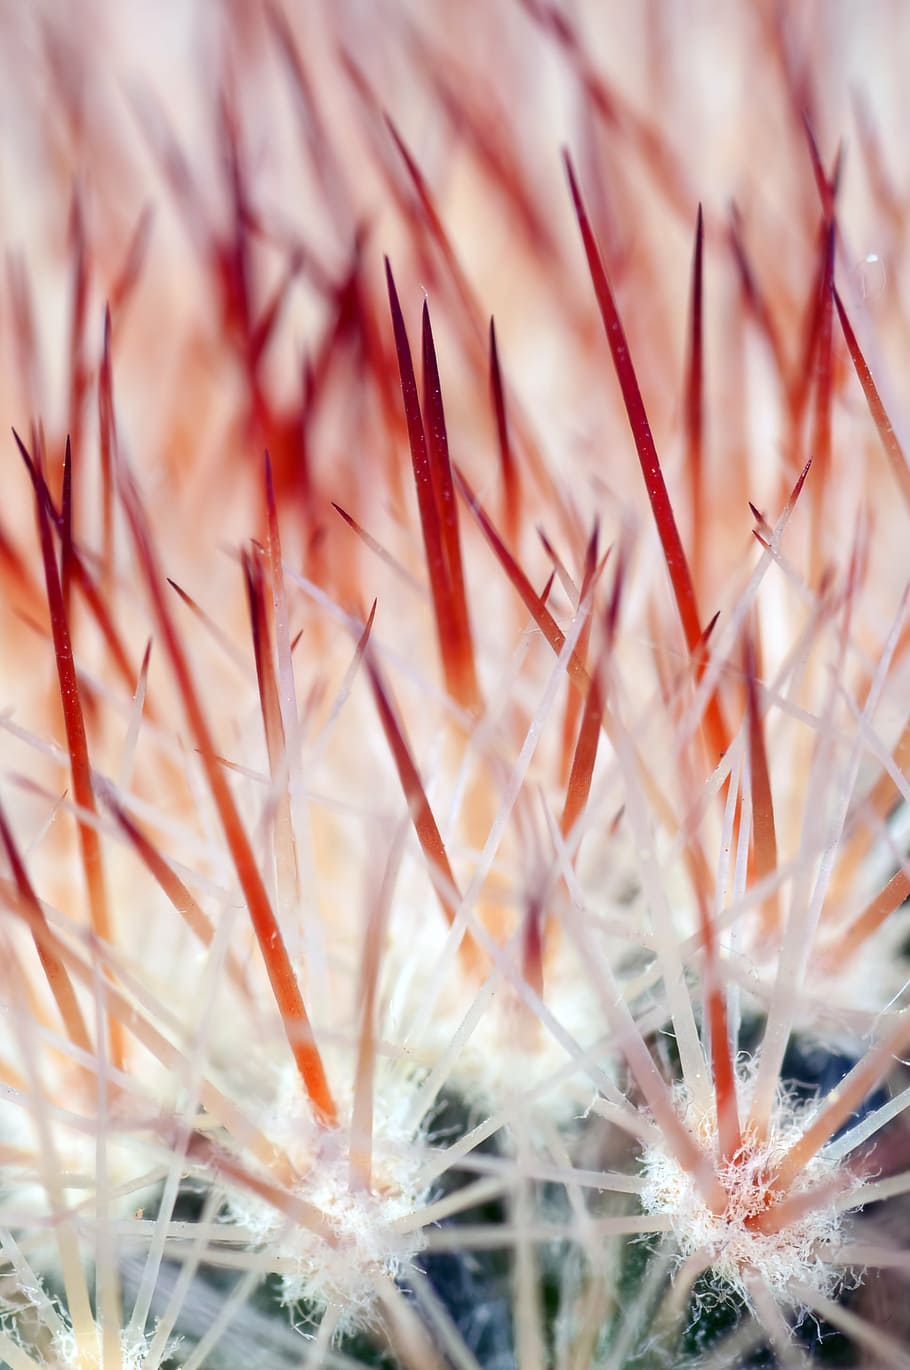 untitled, cactus, colic, flower, macro, nature, close-up, plant, growth, day